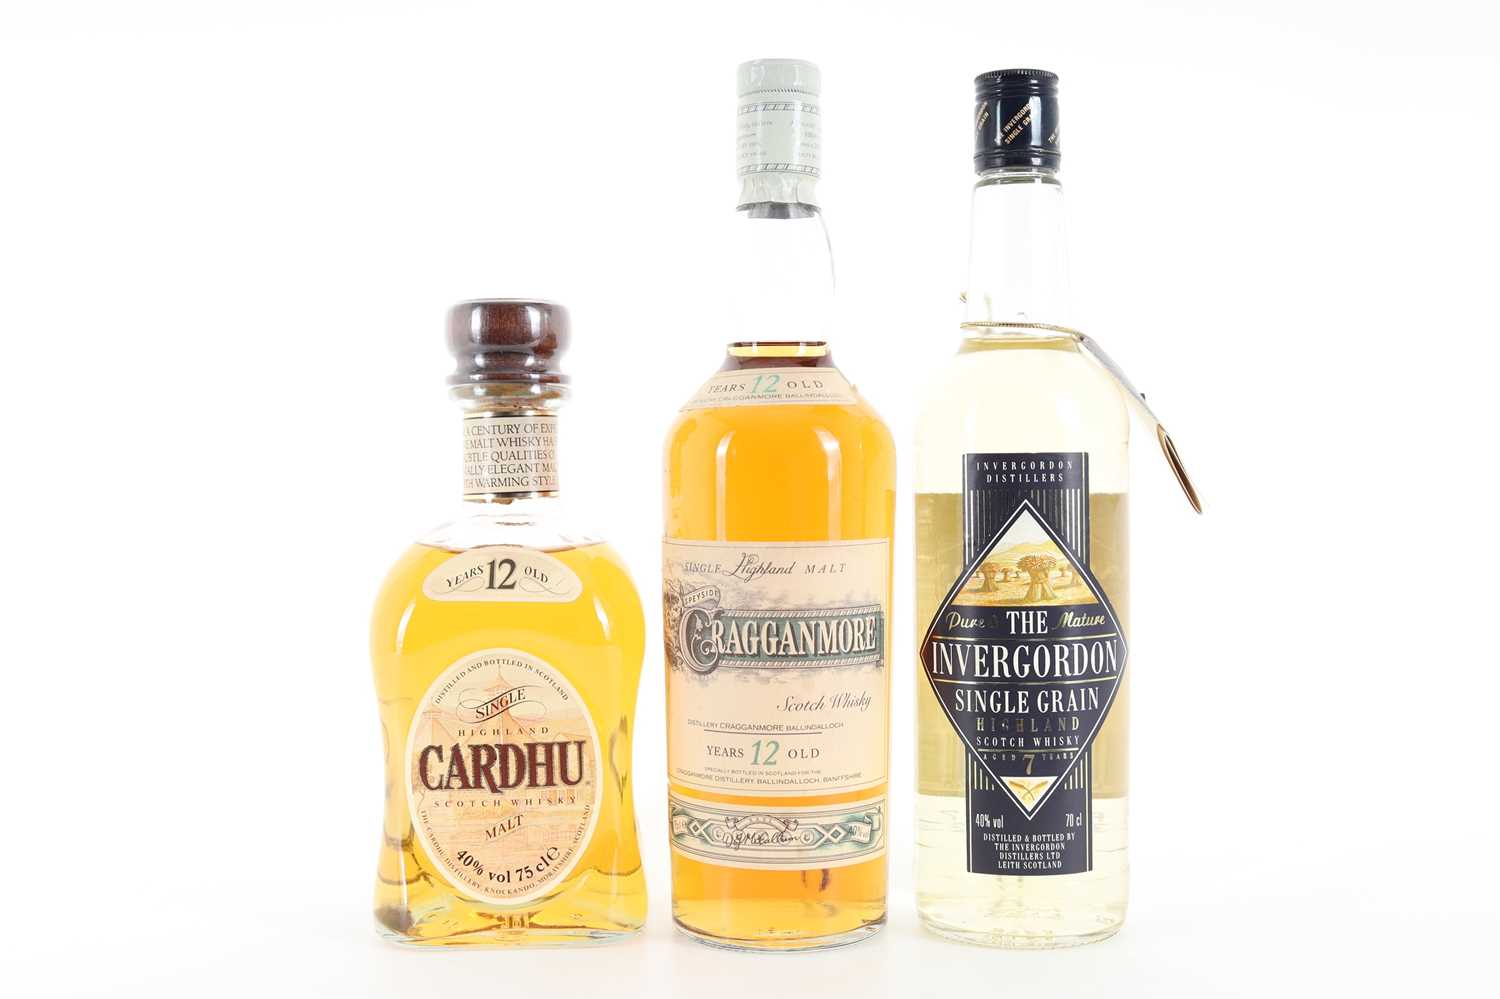 CRAGGANMORE 12 YEAR OLD 75CL, CARDHU 12 YEAR OLD 75CL AND INVERGORDON 7 YEAR OLD SINGLE MALT AND SIN